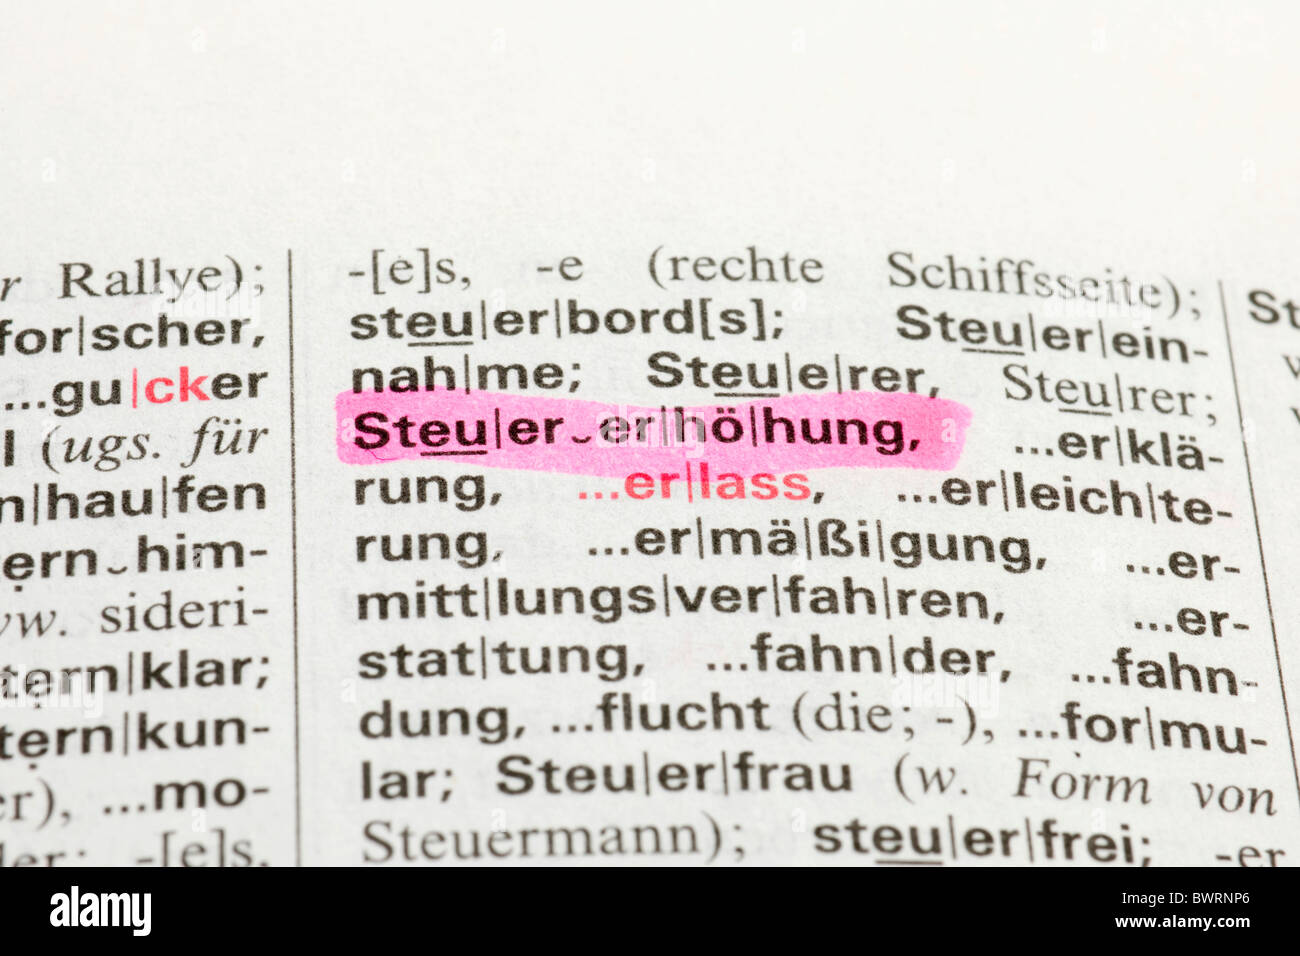 Dictionary entry, Steuererhoehung, German for tax increase Stock Photo